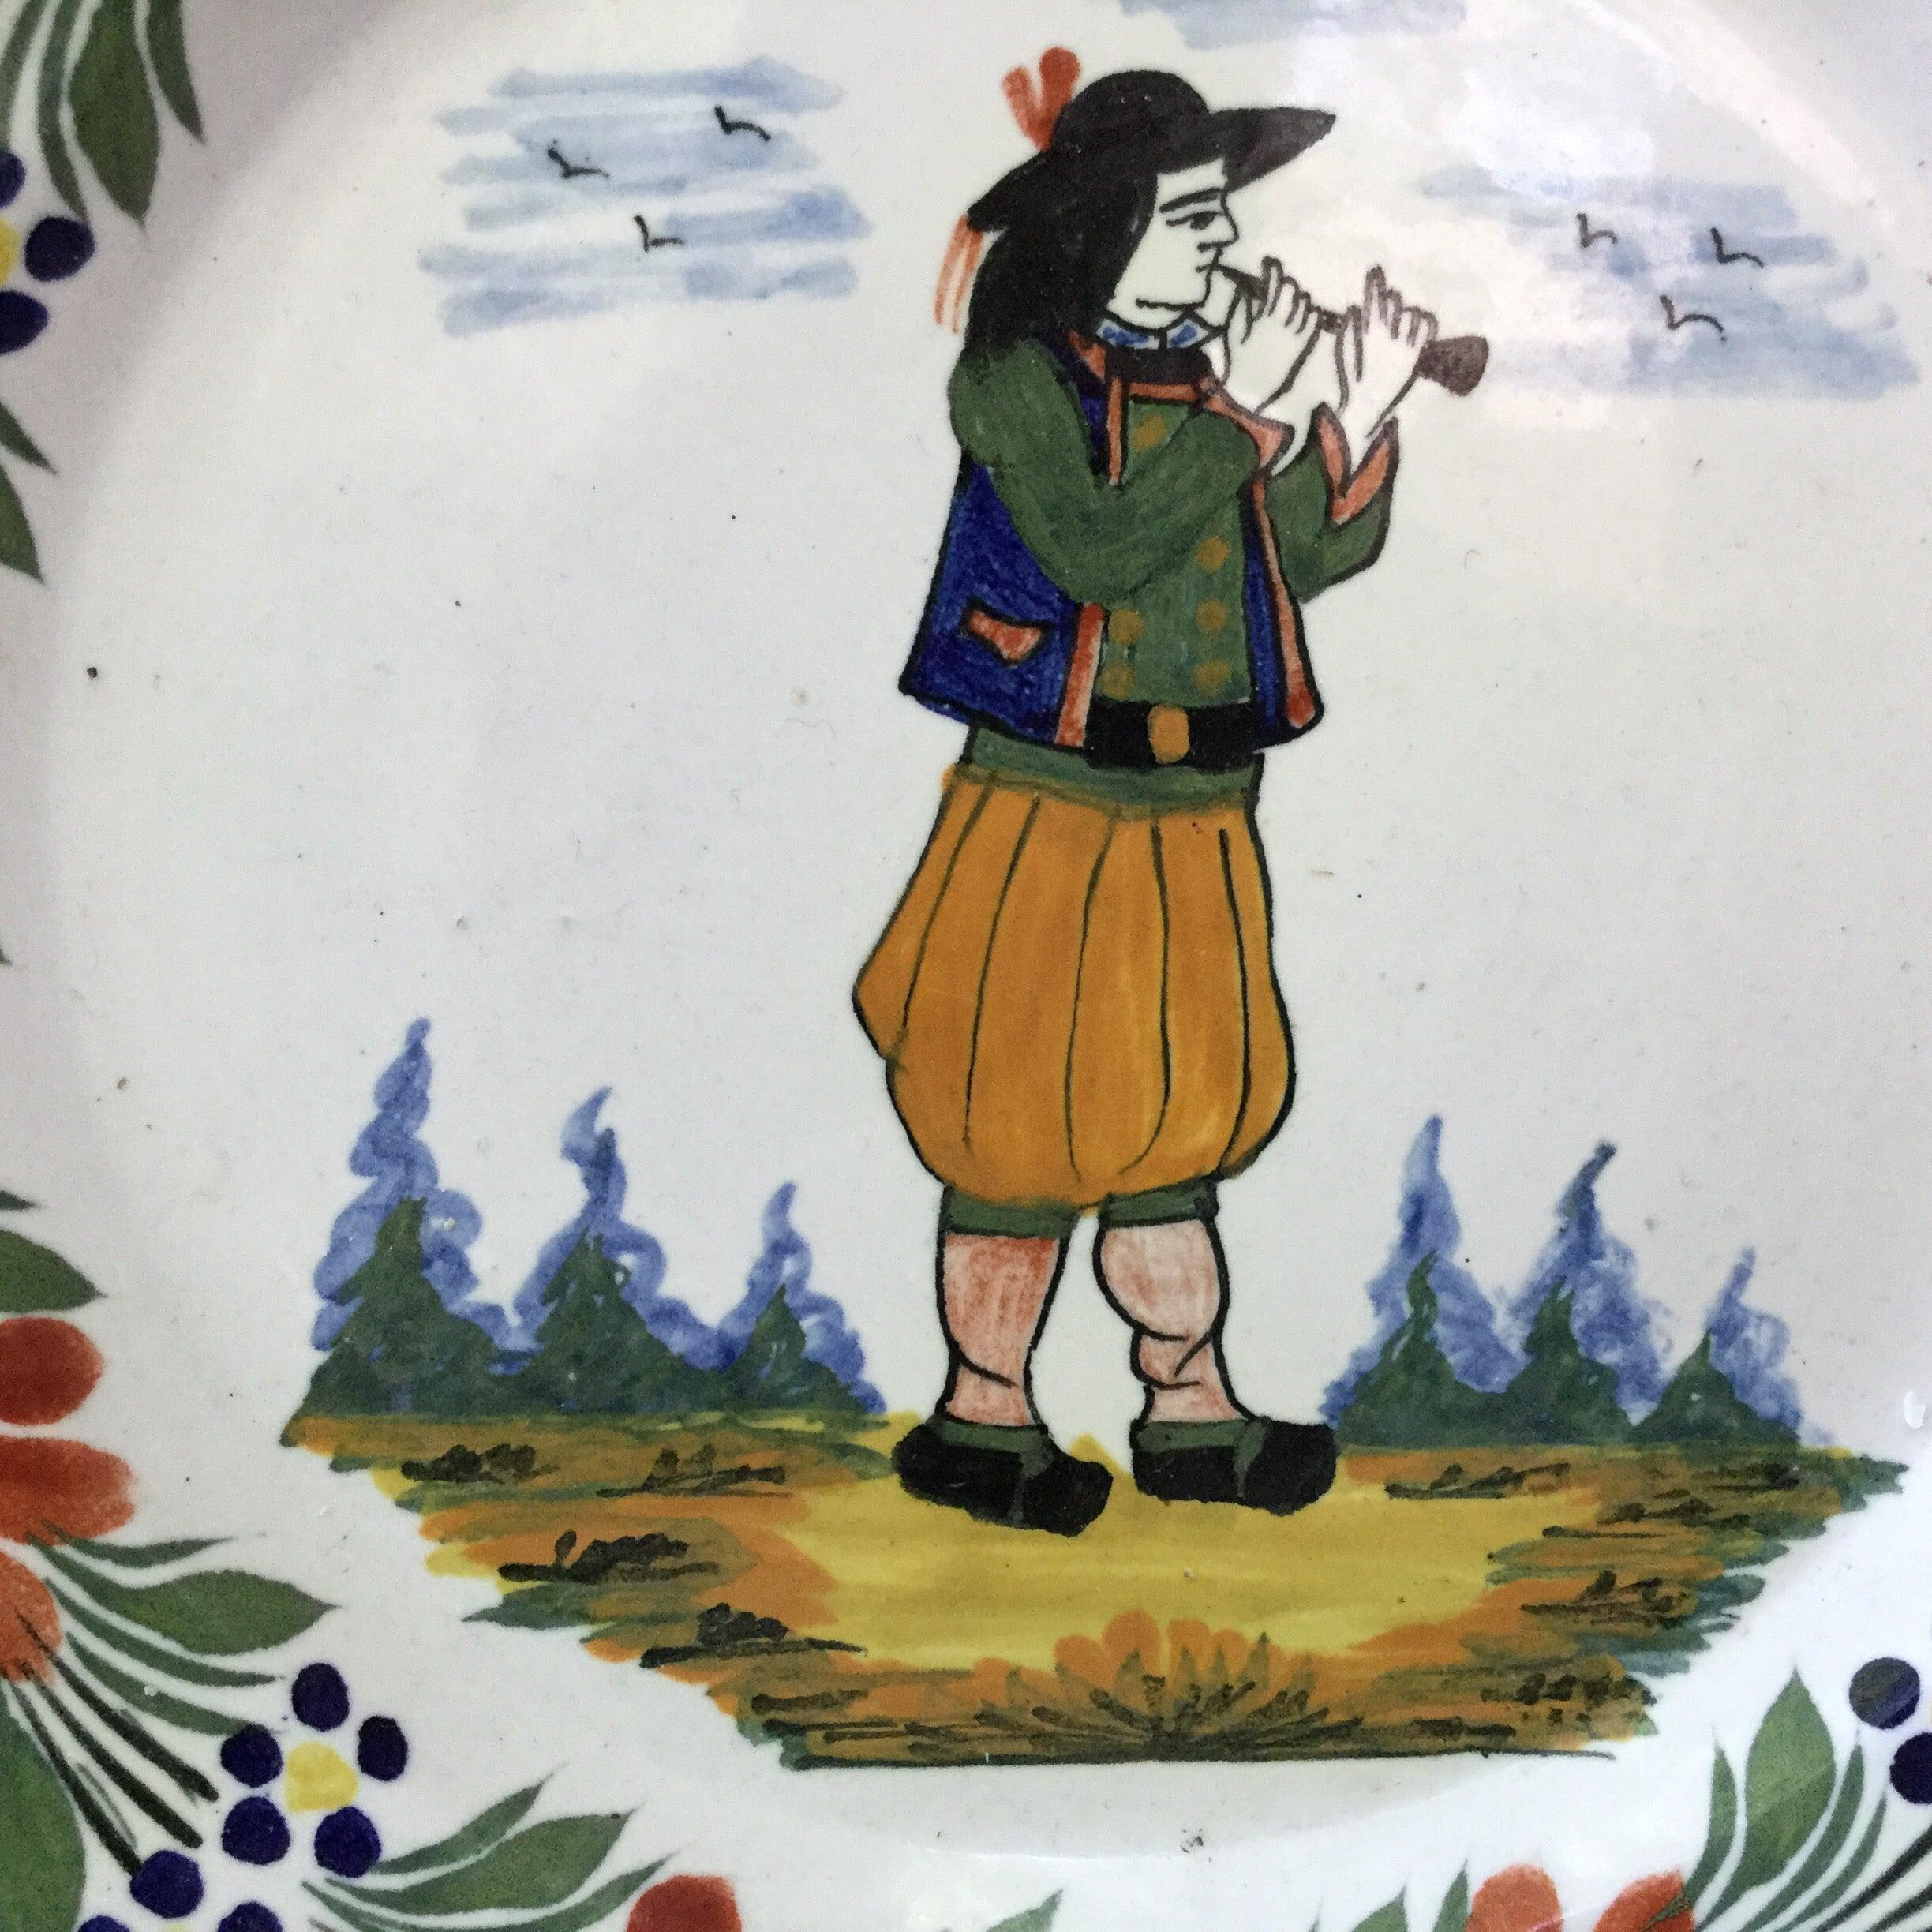 Large French faience plate with a Breton playing music signed Henriot Quimper, circa 1940.